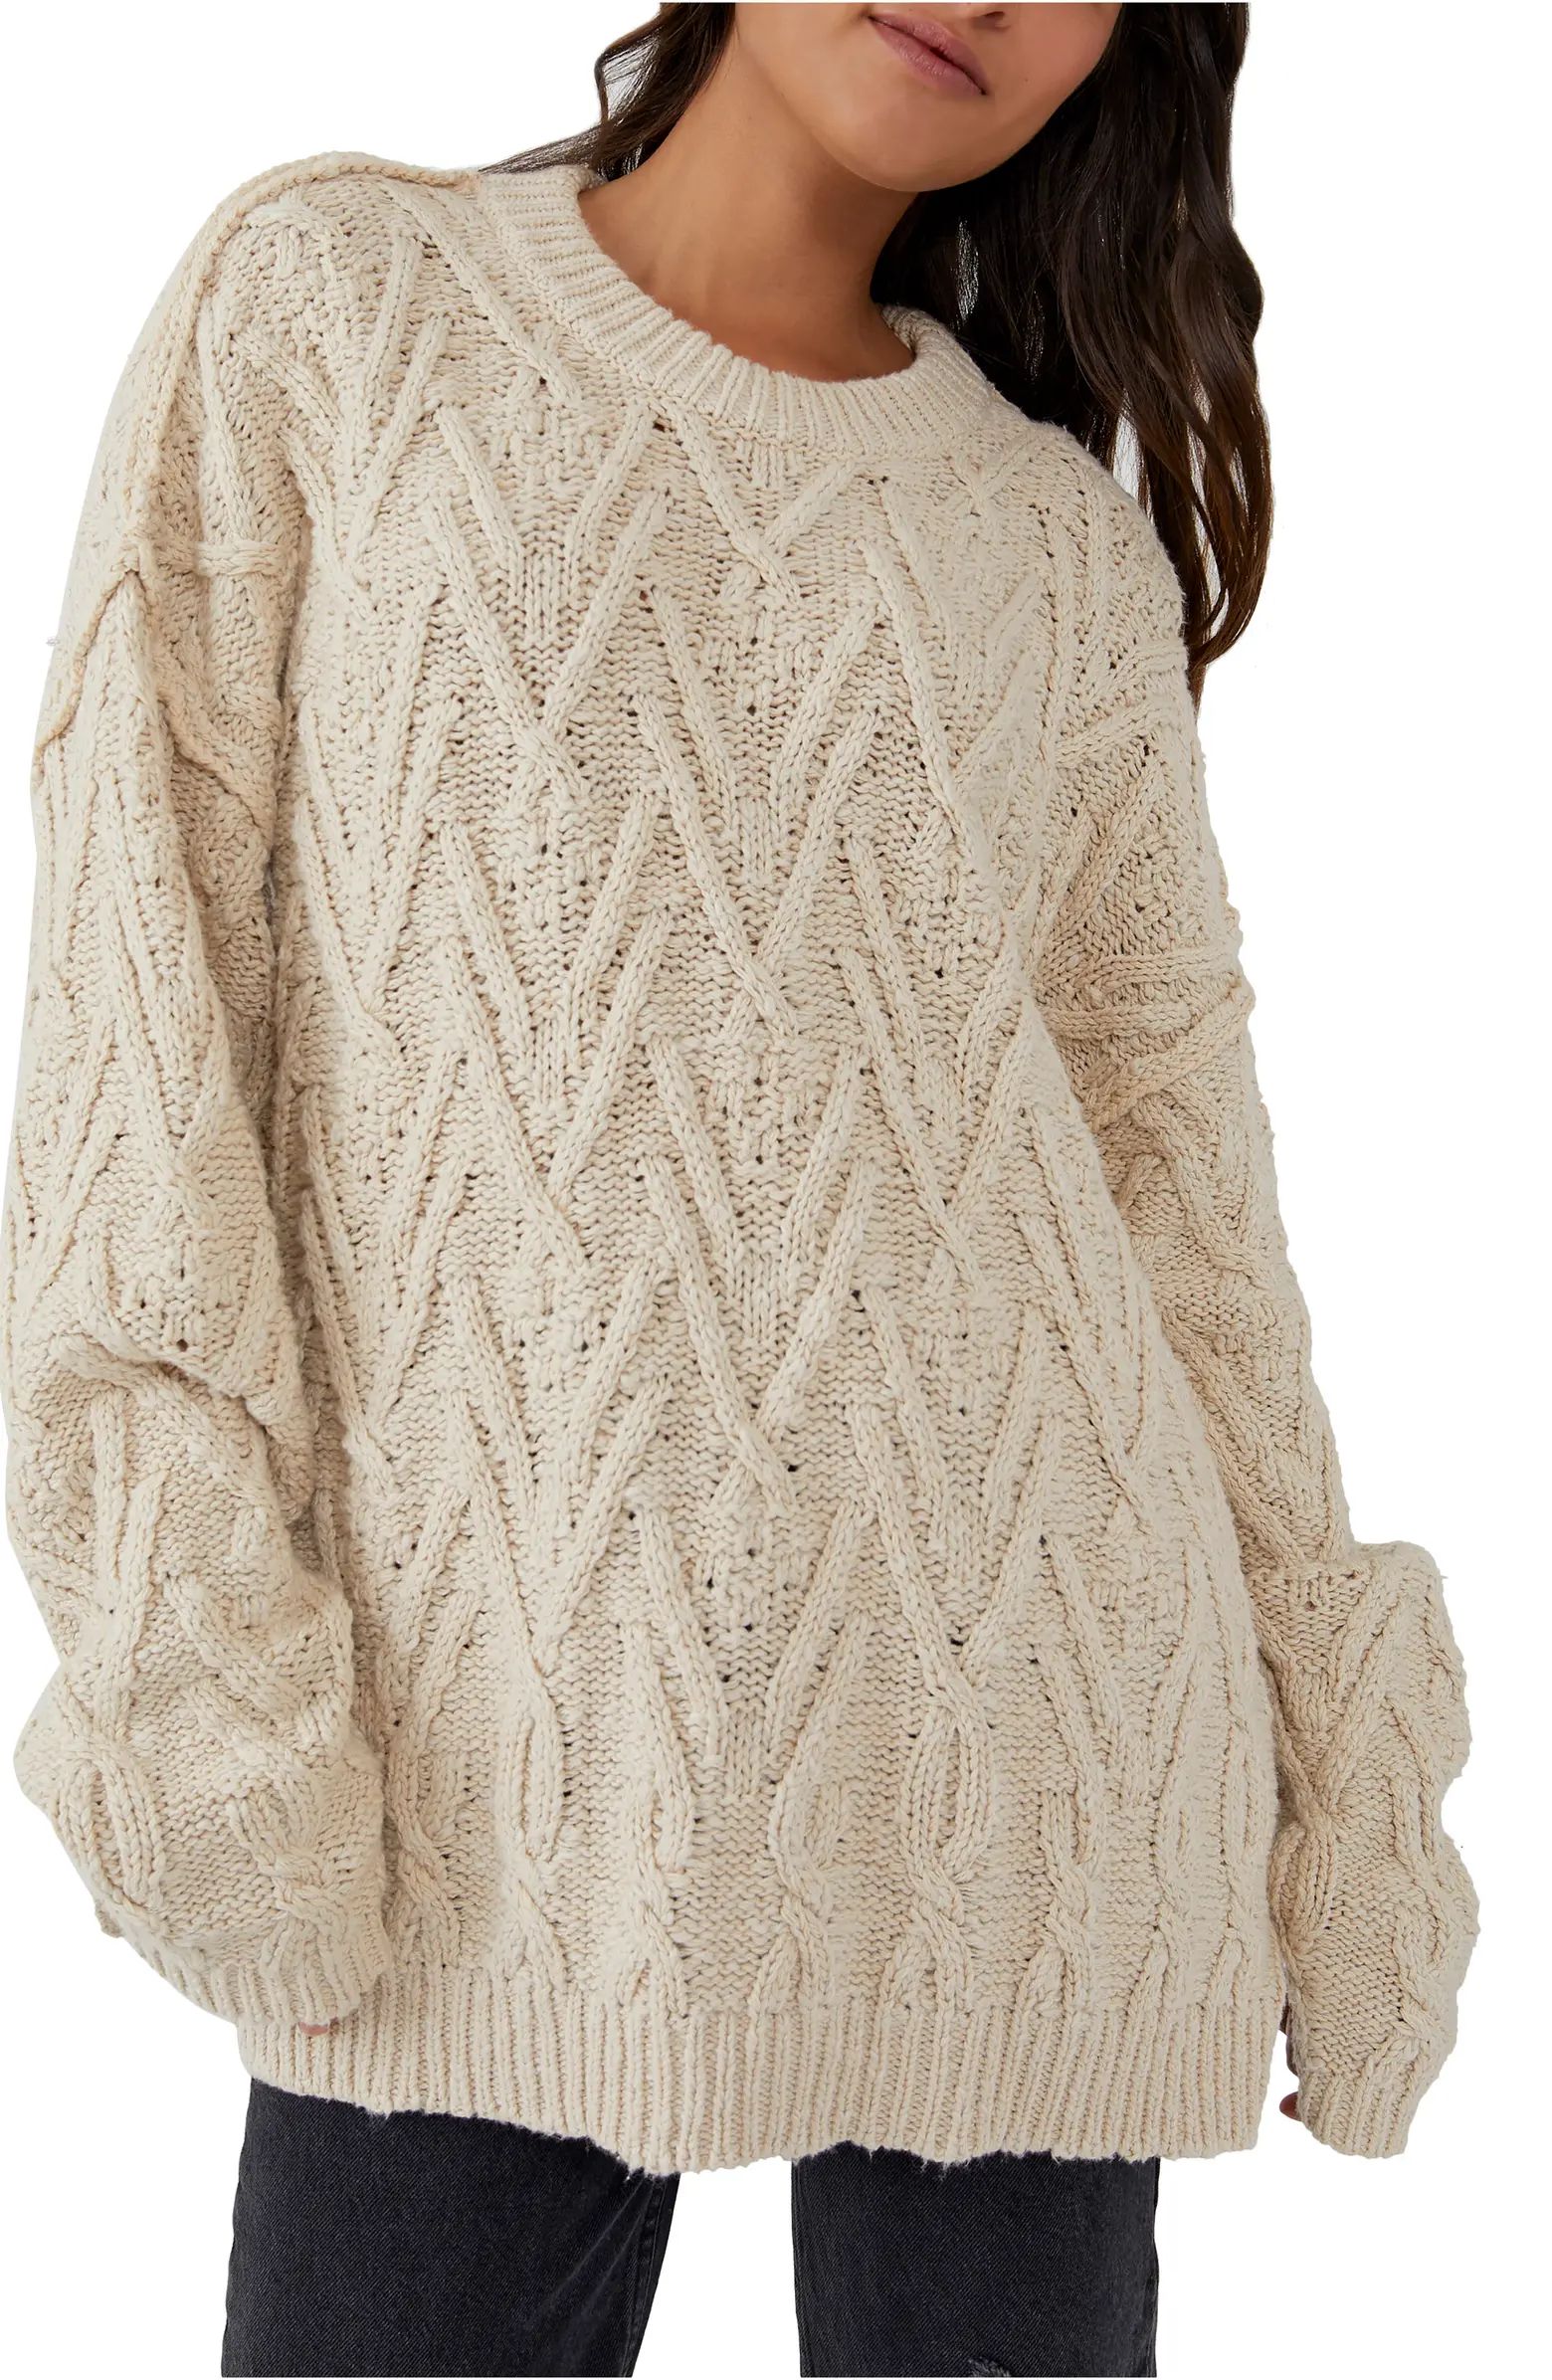 Free People Isla Cable Stitch Tunic Sweater | Nordstrom | Nordstrom